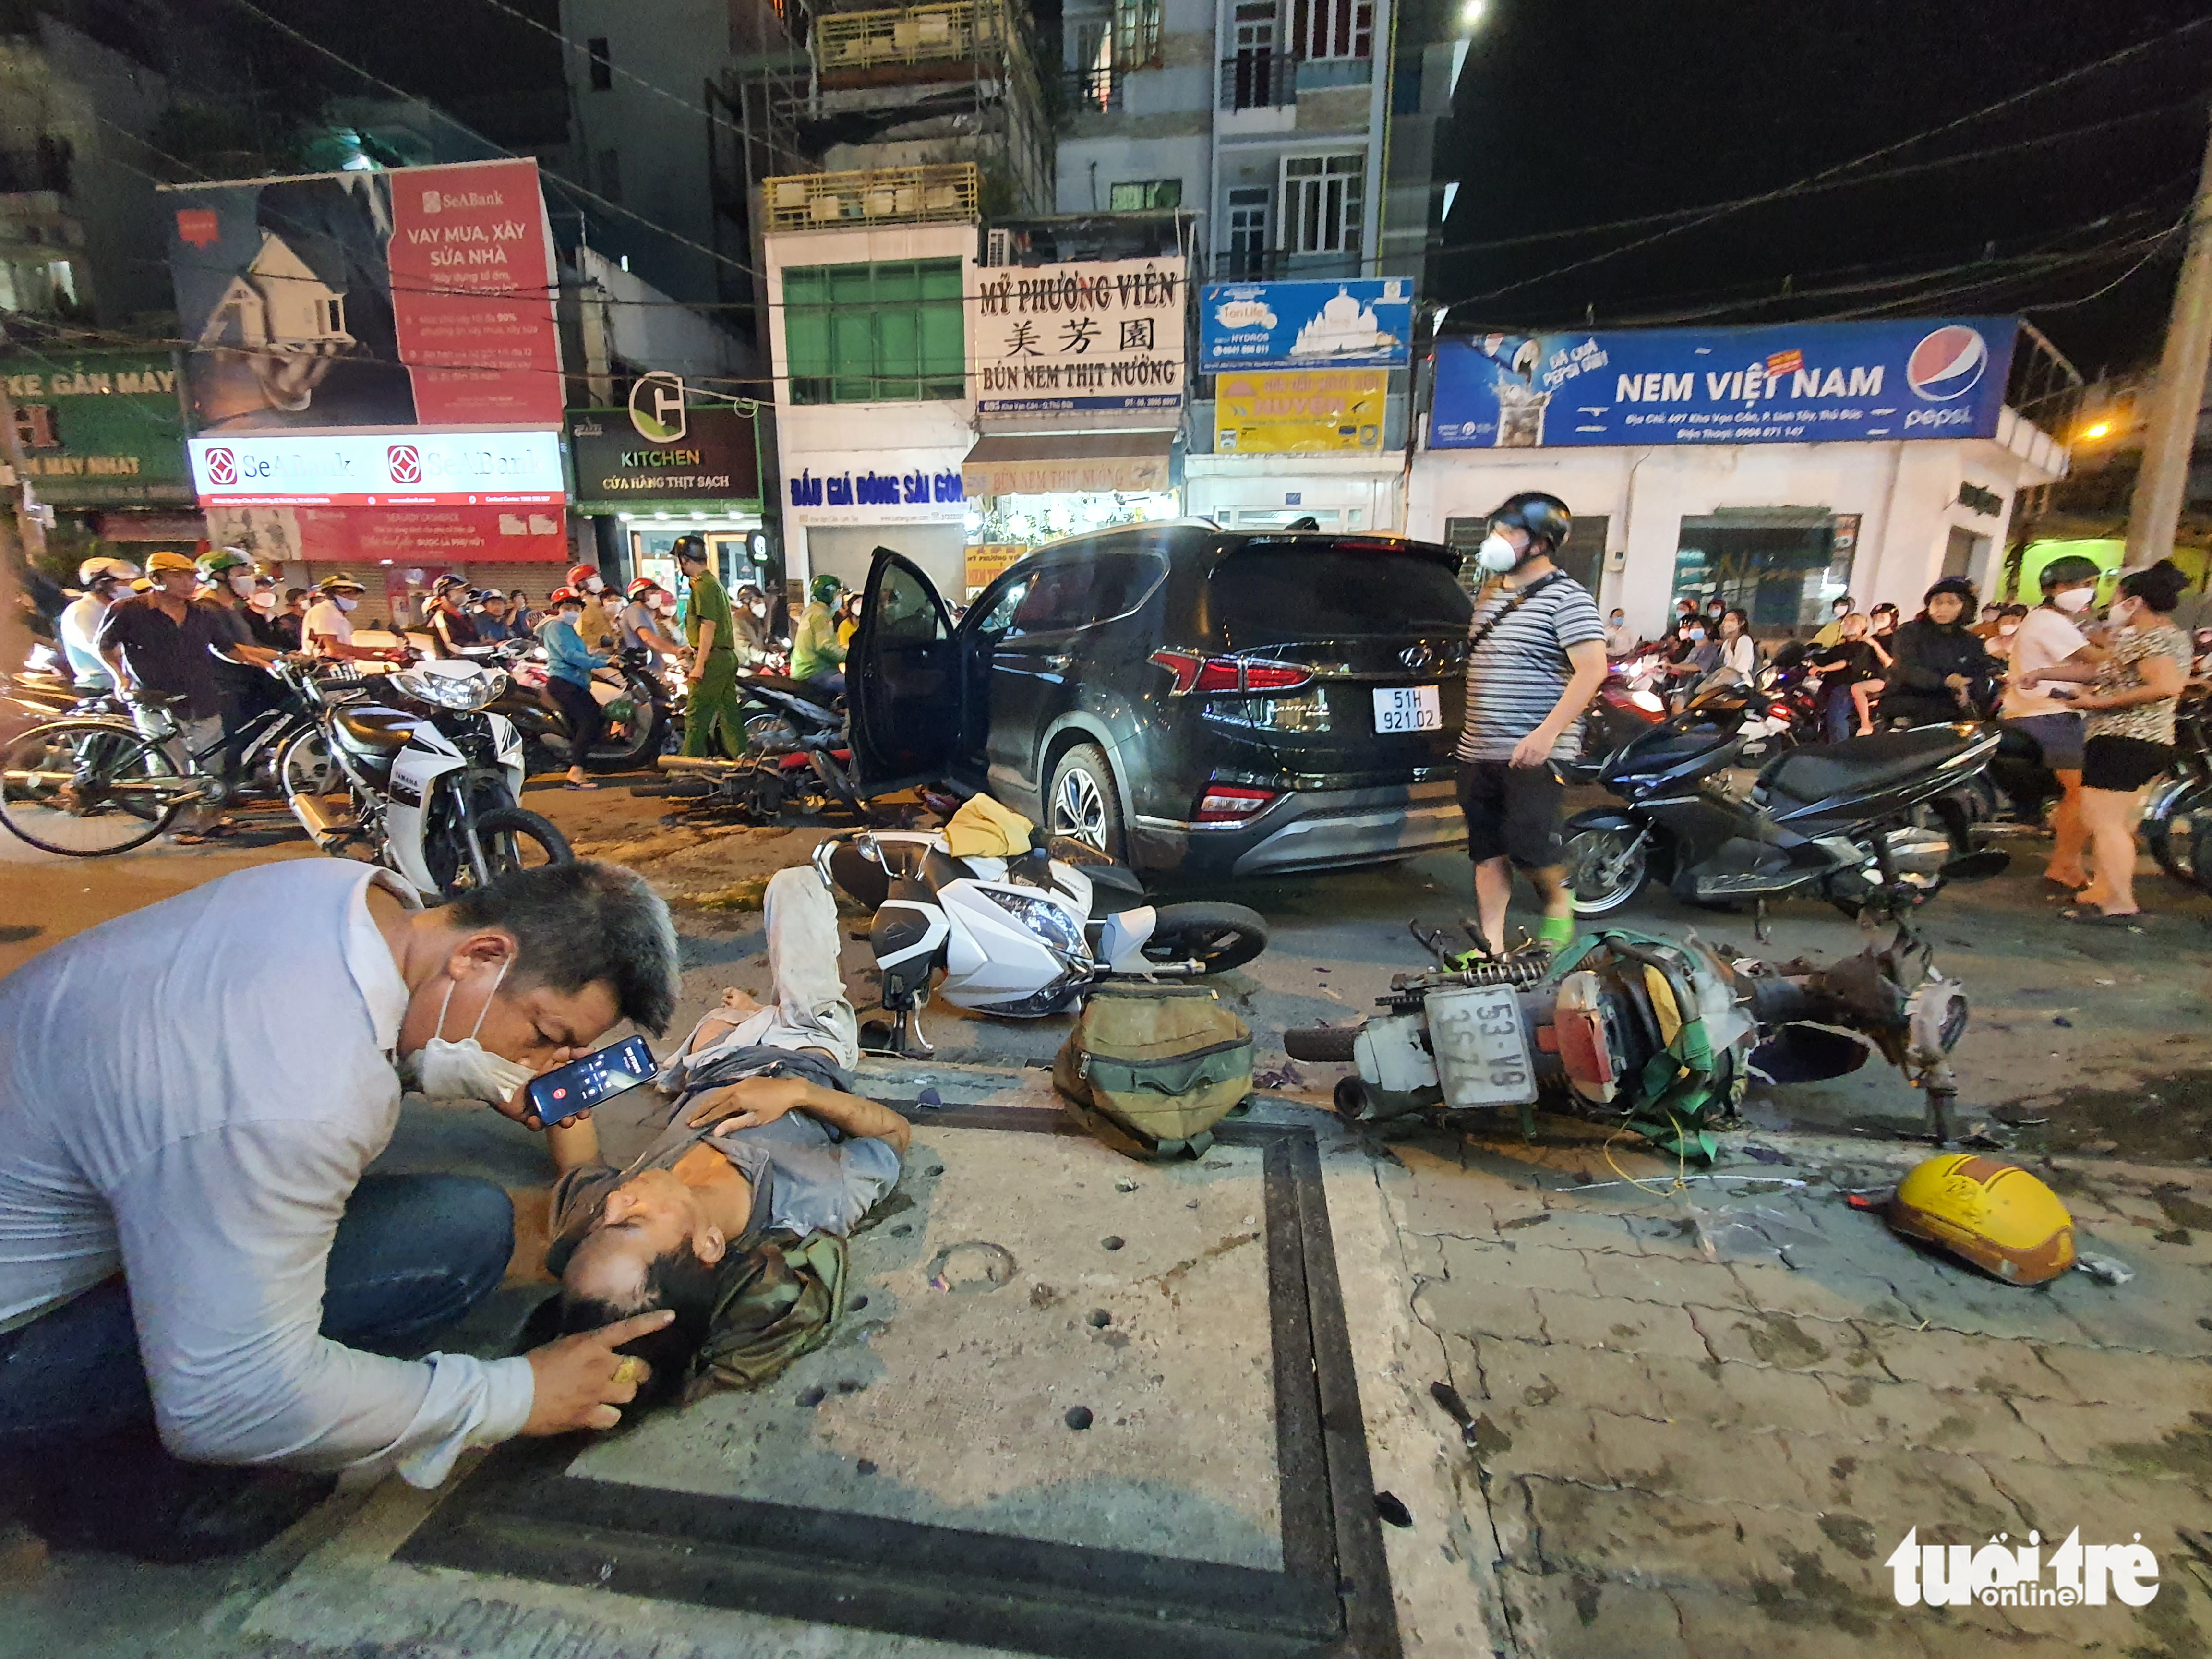 A man talks with an injured victim on the sidewalk following the crash in Thu Duc City, Ho Chi Minh City, May 5, 2022. Photo: Minh Hoa / Tuoi Tre